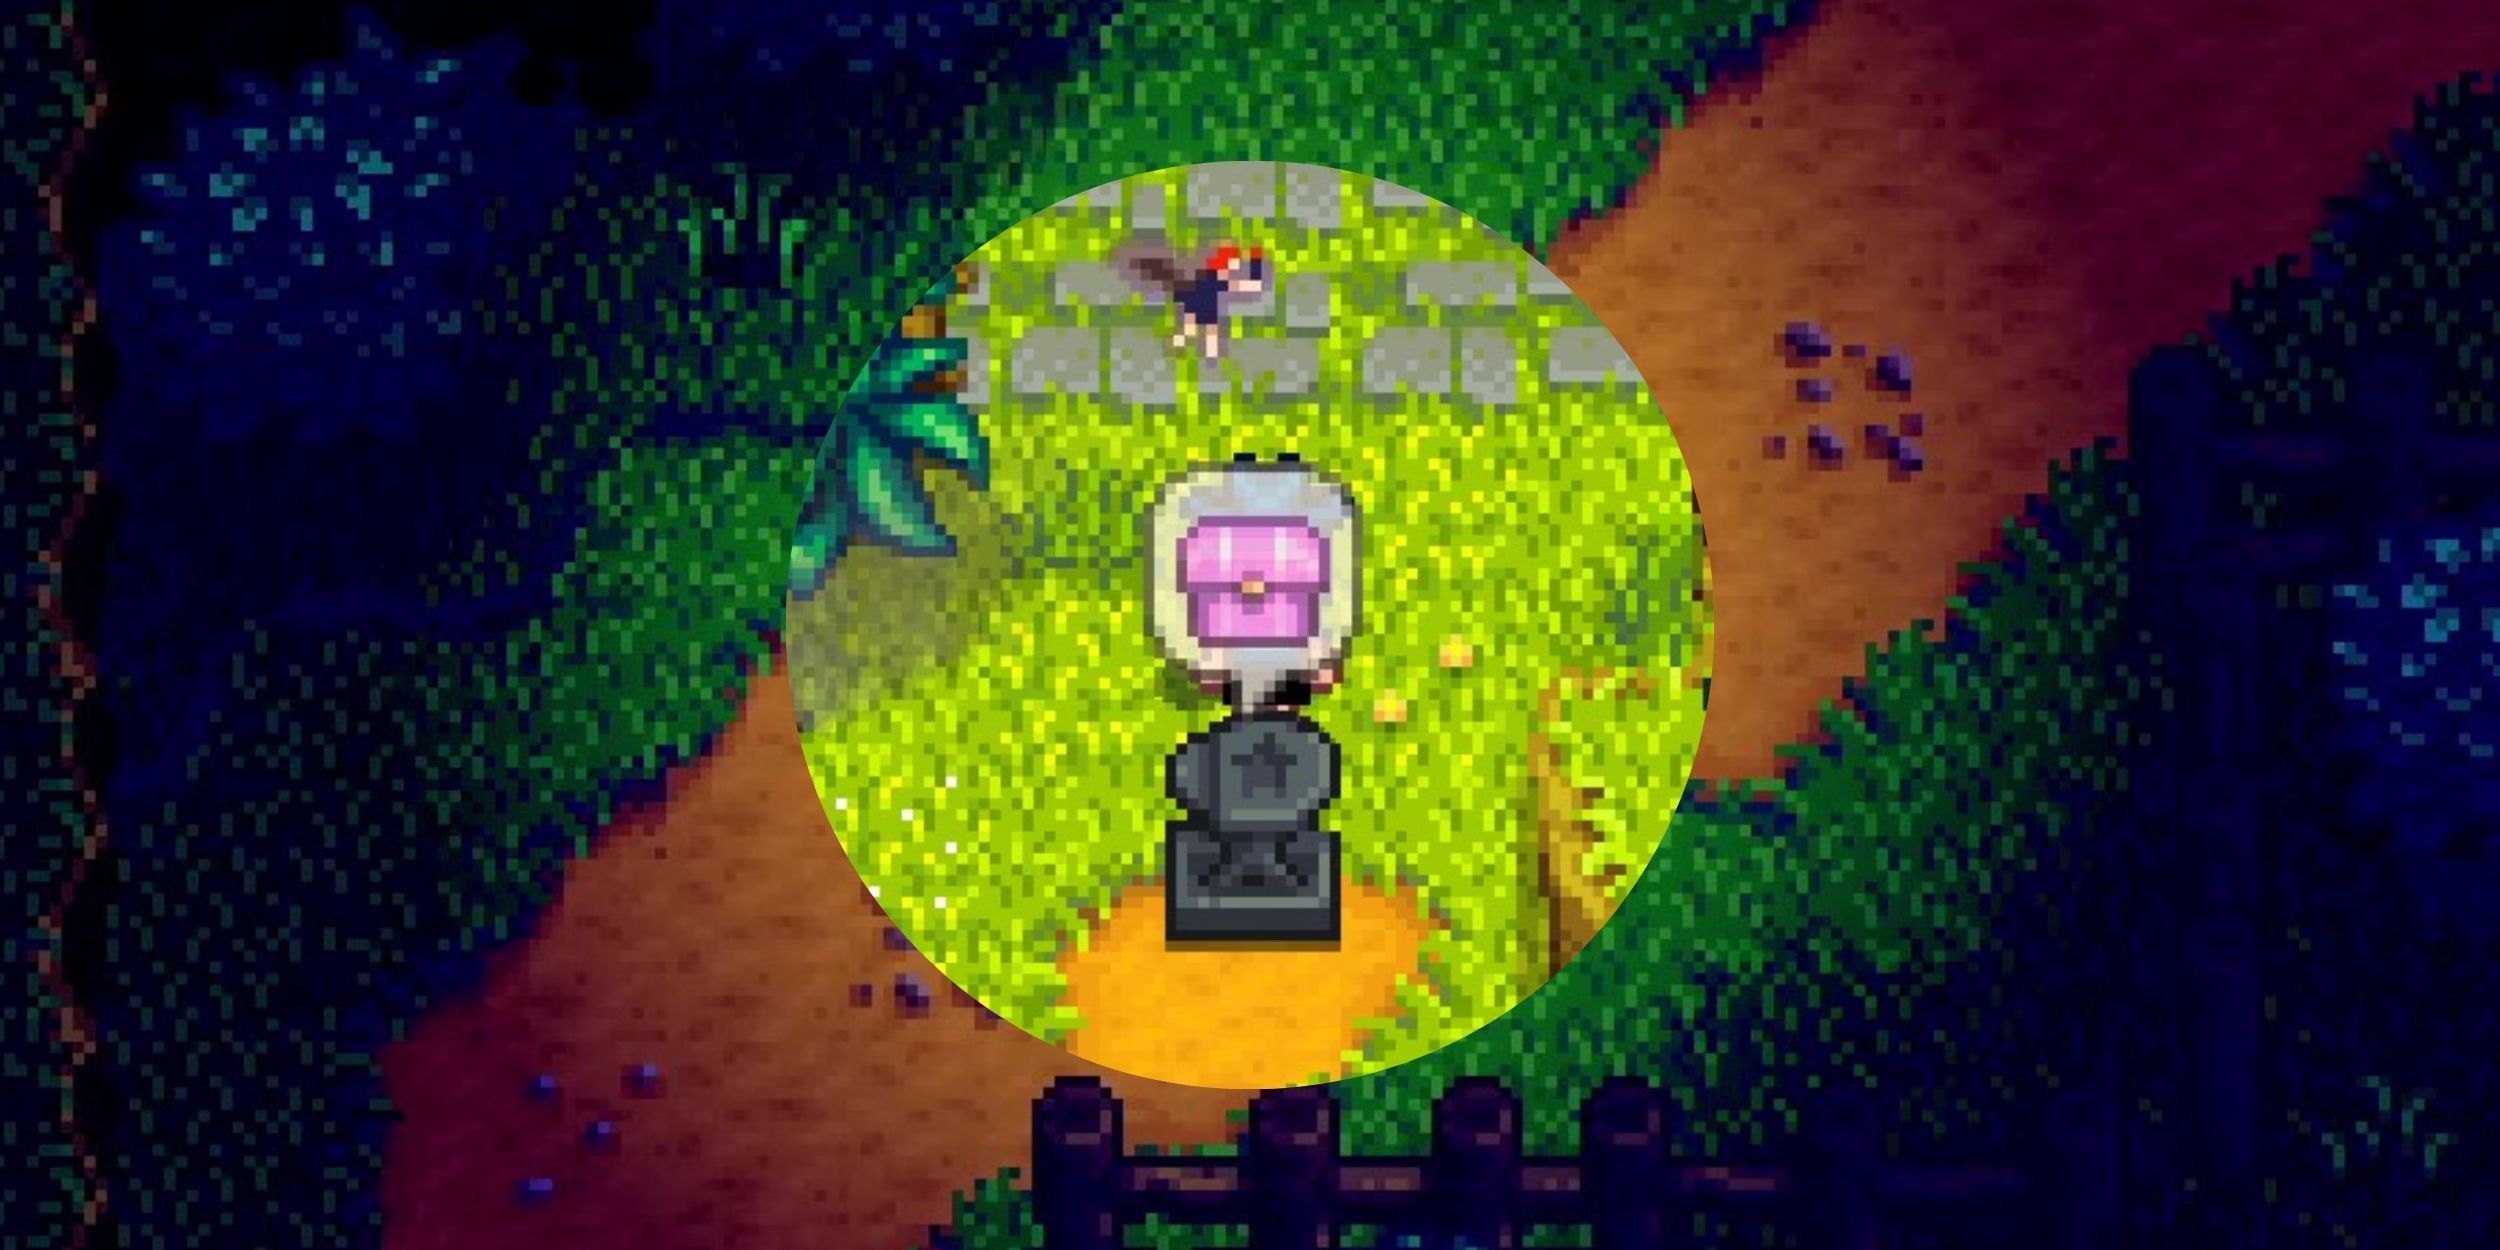 A Fairy Box on an anvil and a floating fairy in Stardew Valley.